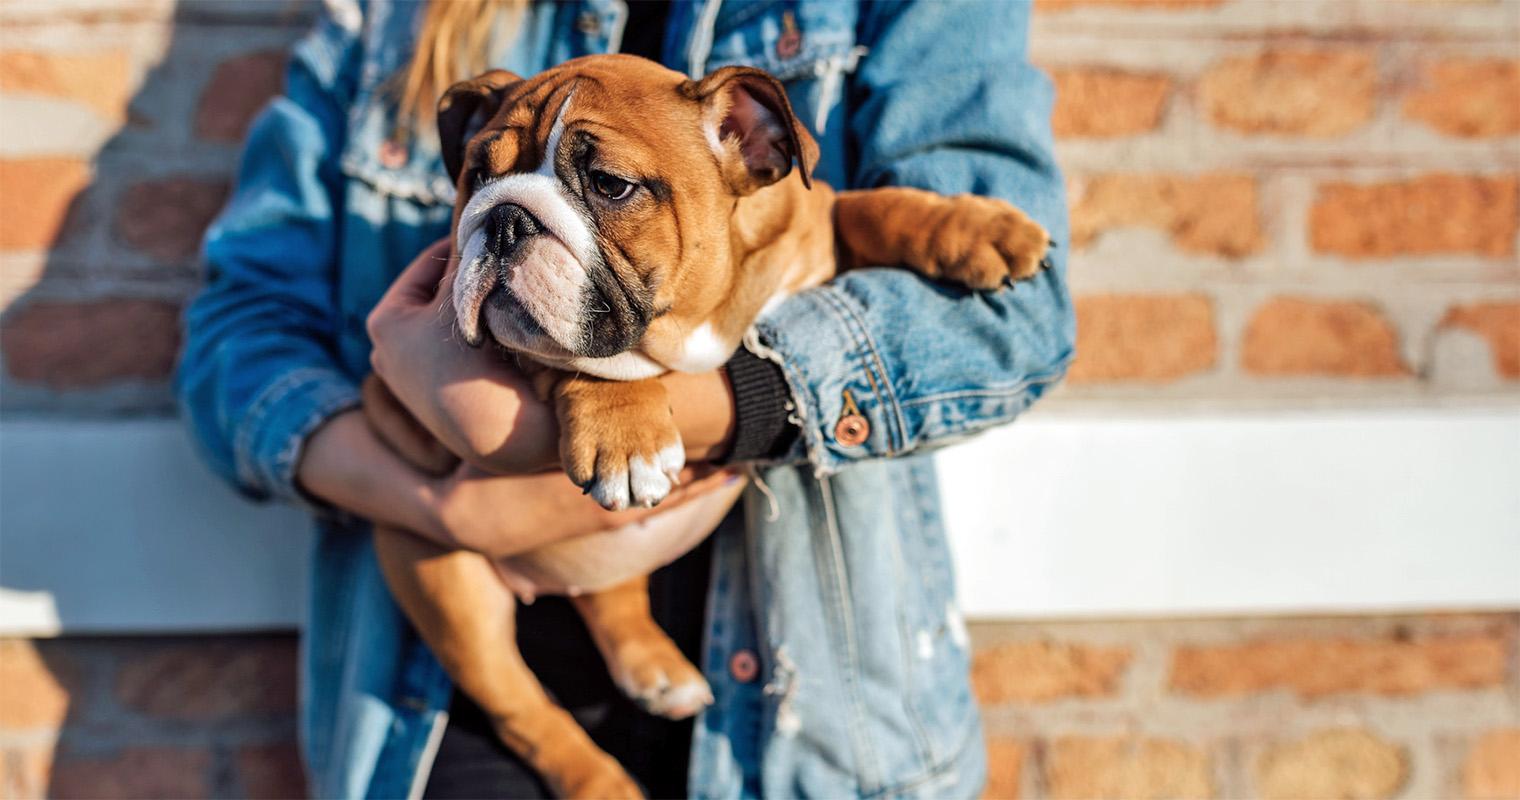 10 Wrinkly Dog Breeds That Give Us All the Feels